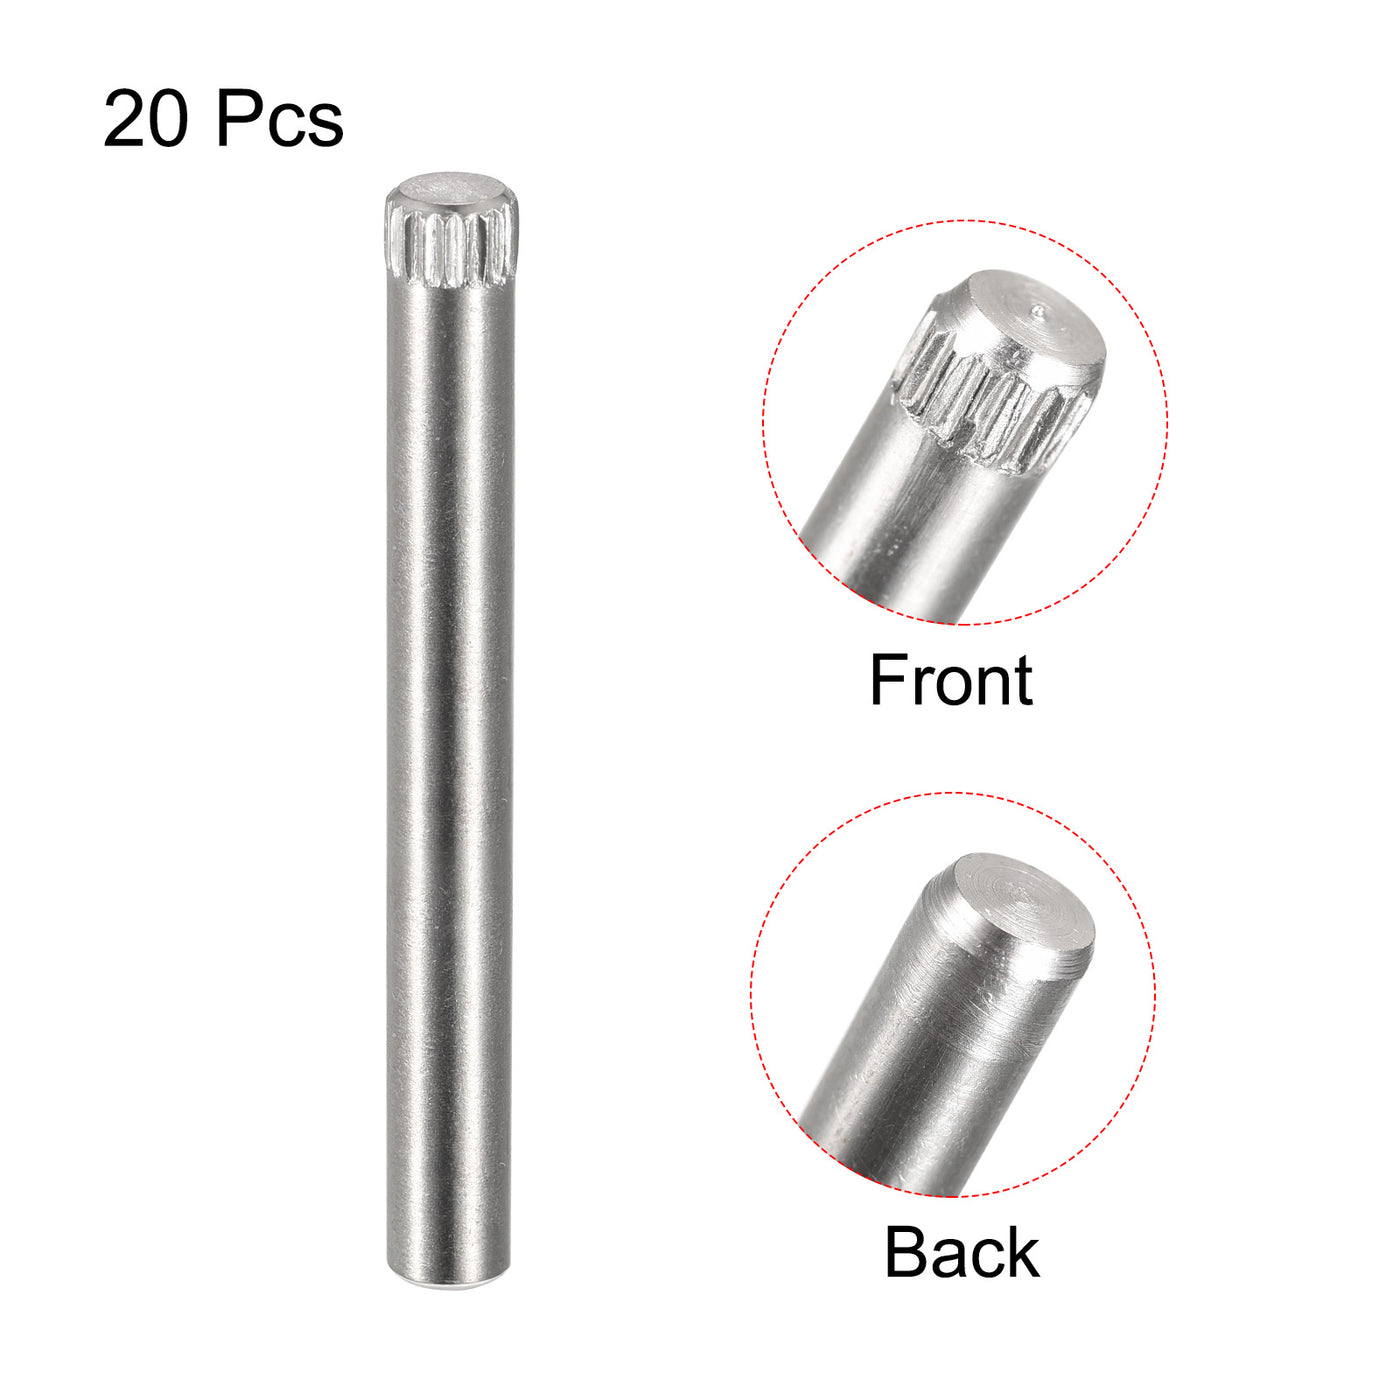 uxcell Uxcell 5x45mm 304 Stainless Steel Dowel Pins, 20Pcs Knurled Head Flat End Dowel Pin